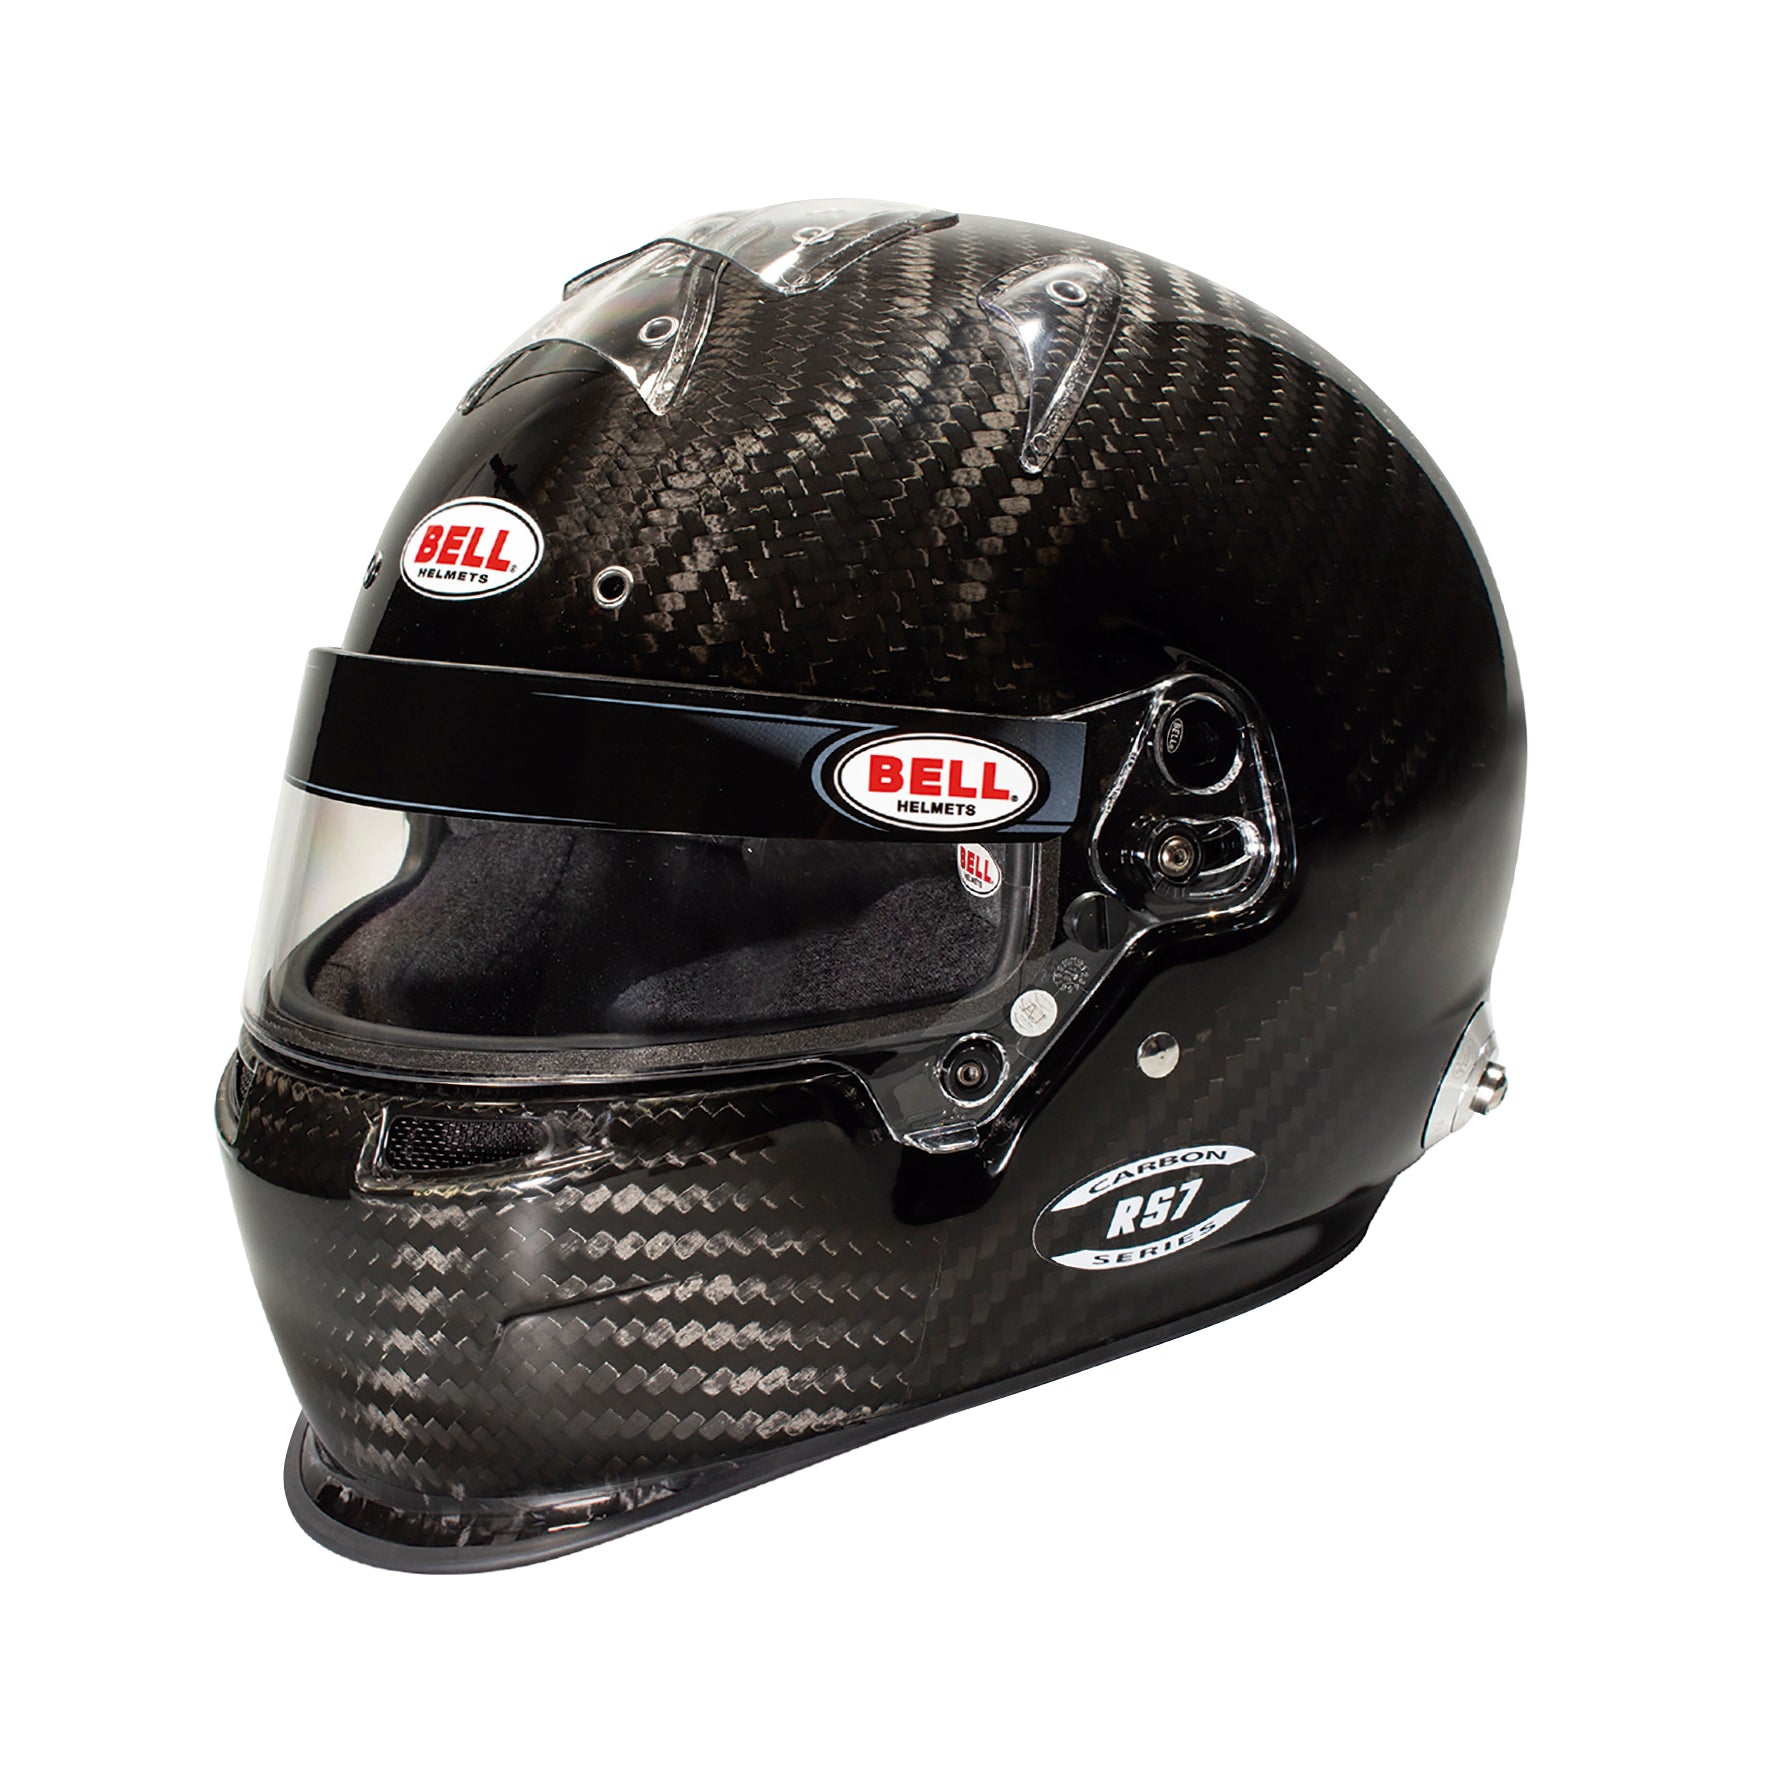 BELL 1204A10 Шолом full face RS7 CARBON DUCKBILL, HANS, FIA, size 60 (7 1/2) Photo-1 